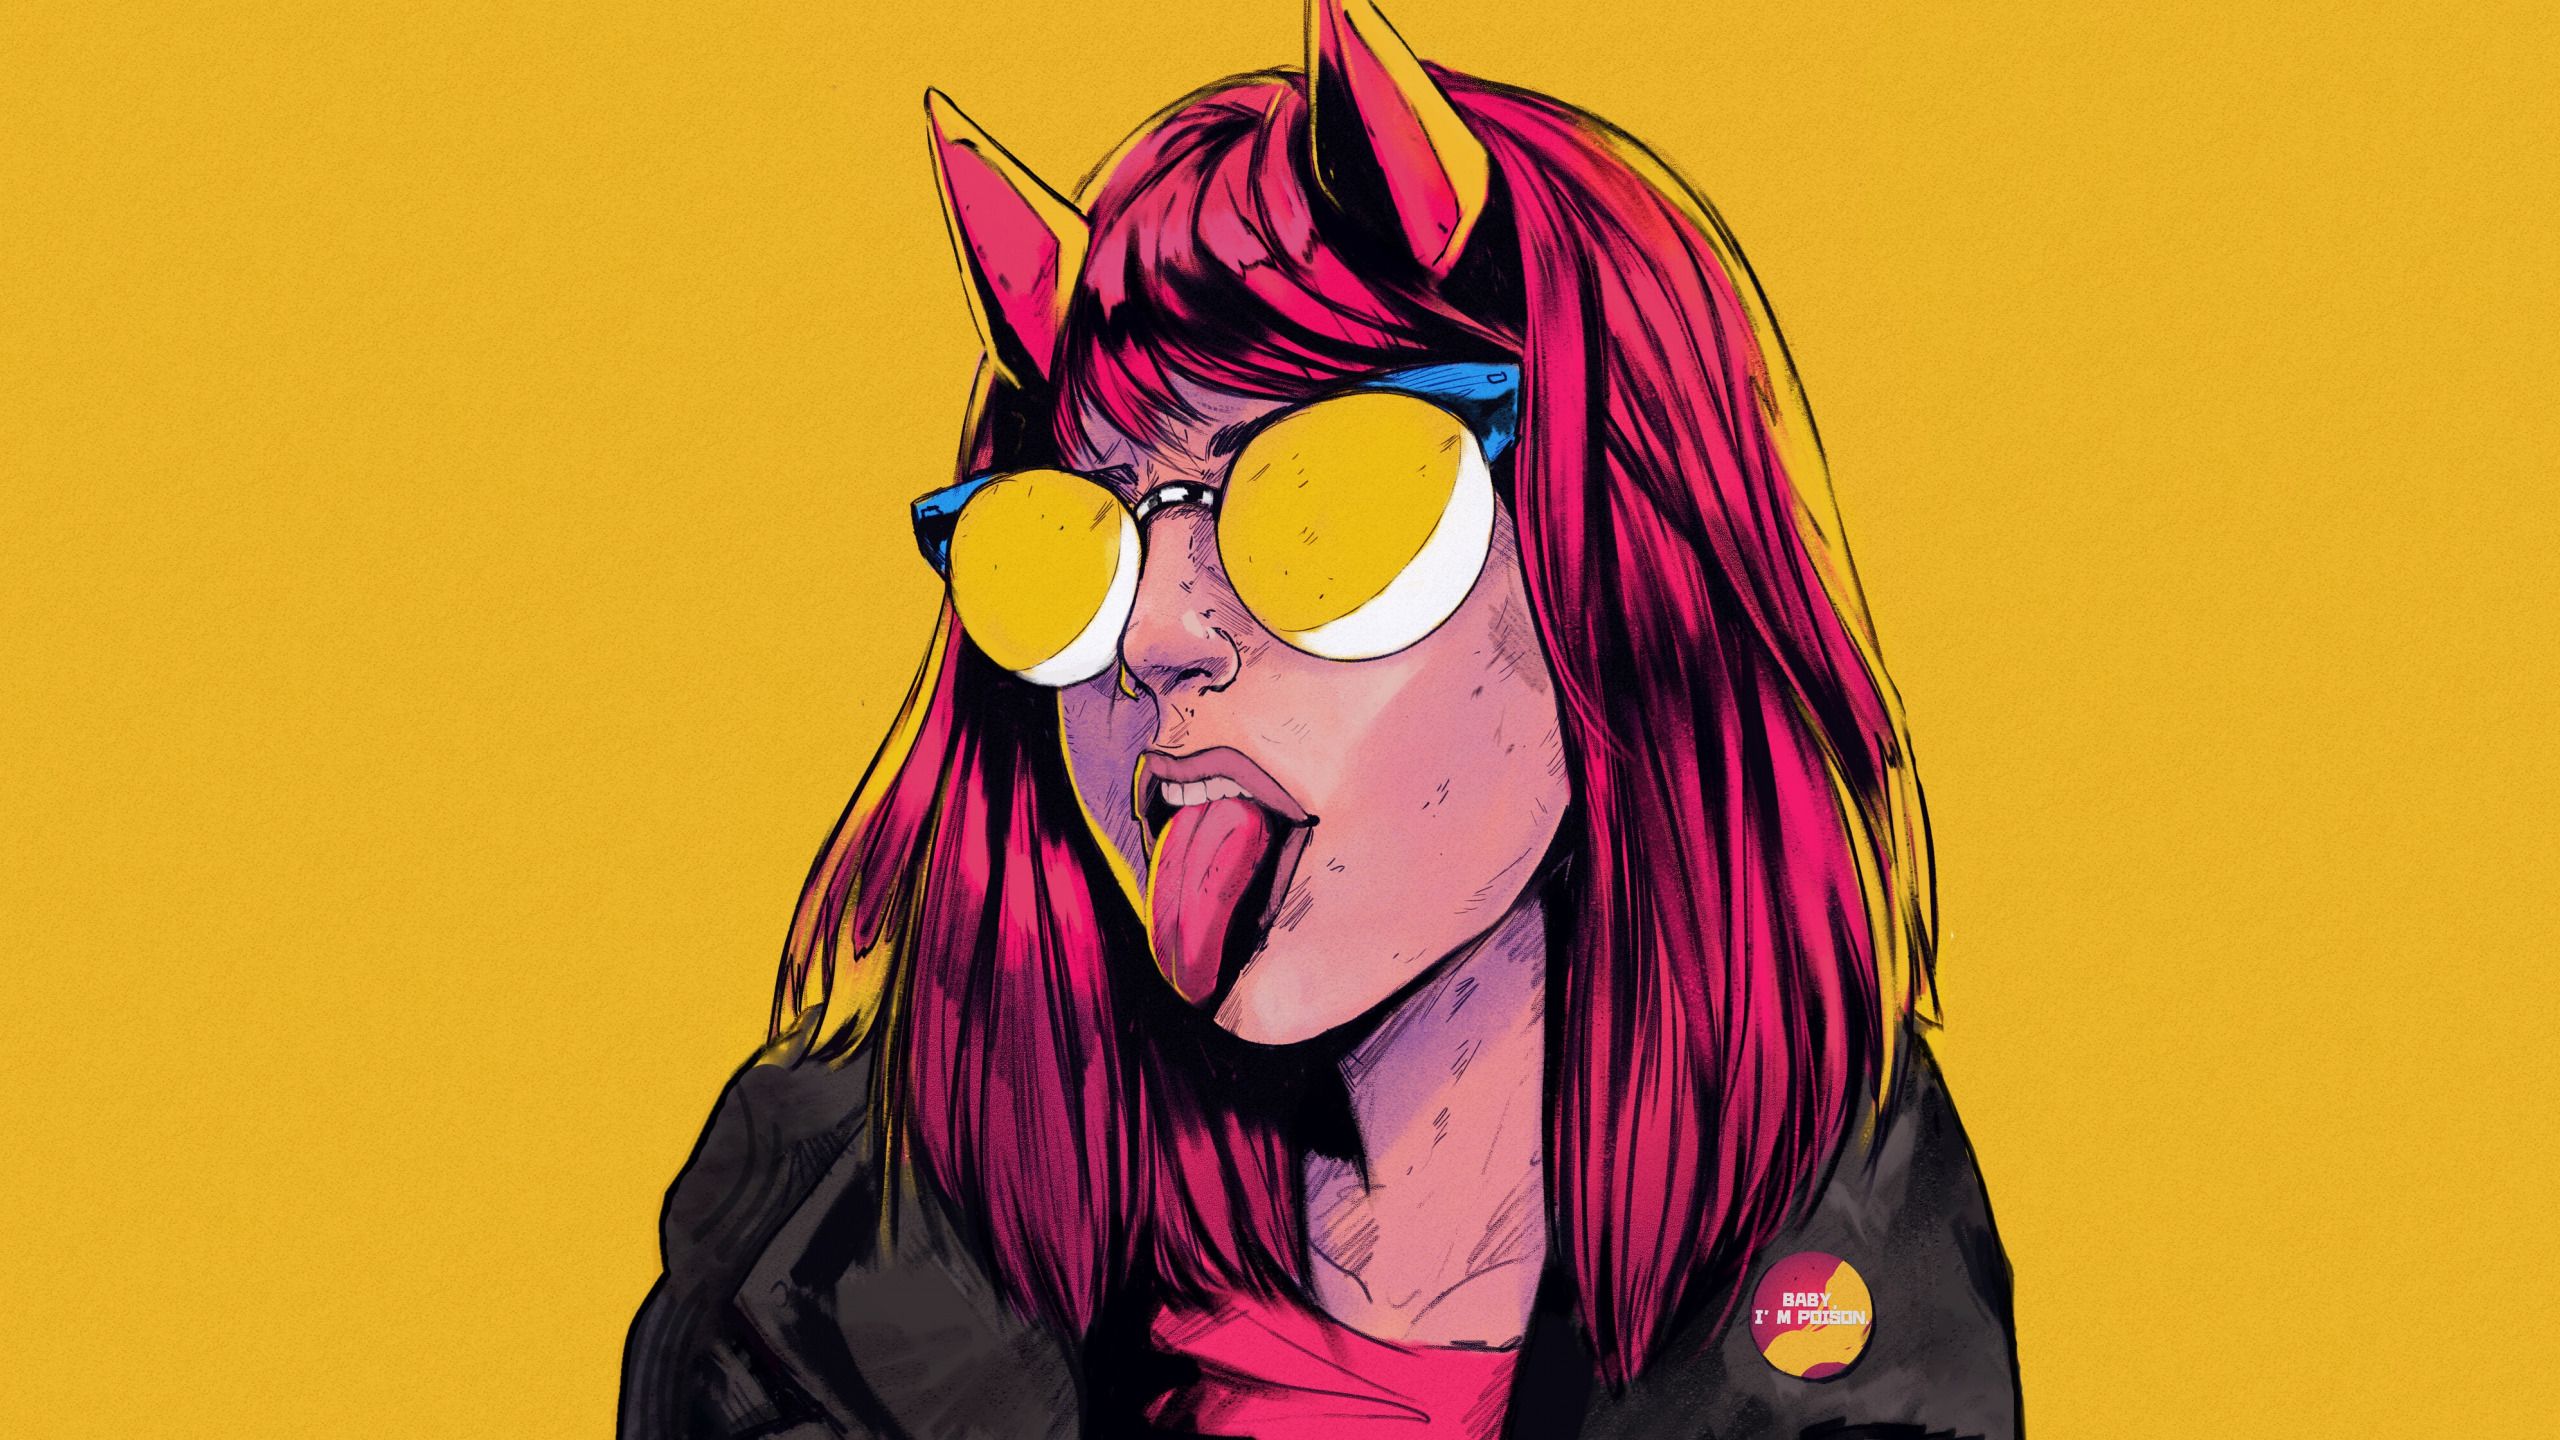 Download wallpaper Girl, Language, Glasses, Style, Face, Girl, Horns, Art, Art, Style, Face, Glasses, Horns, Tongue, Aesthetic, Bruno Ferreira, section art in resolution 2560x1440